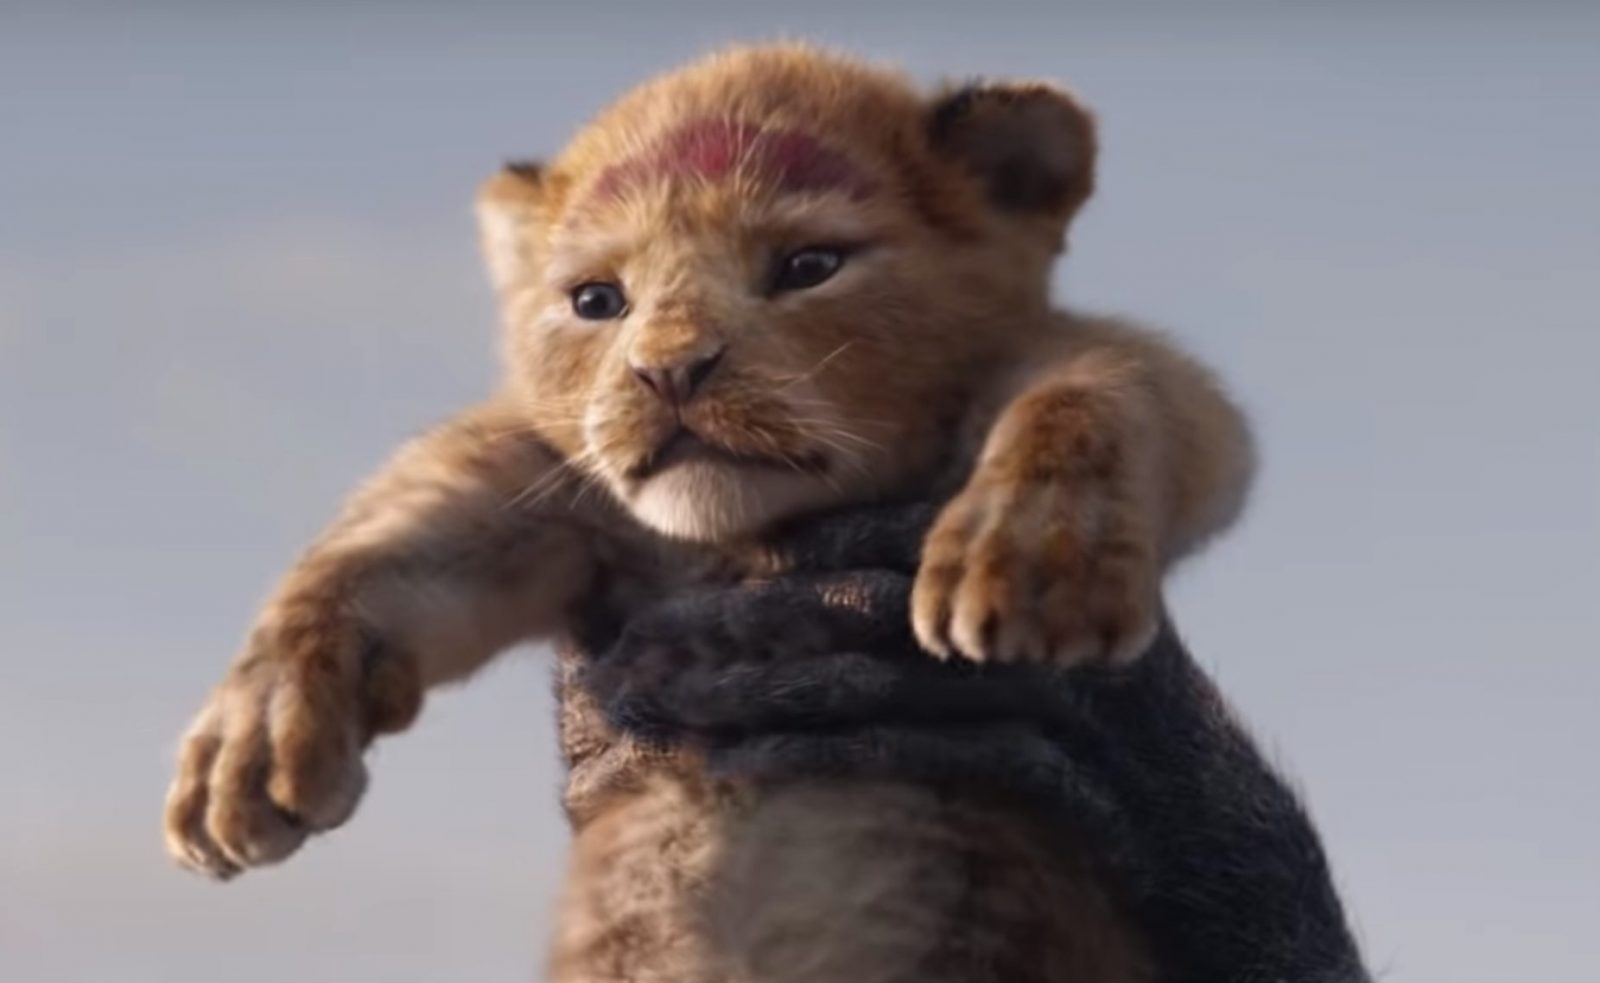 Are You A Cat Person? The Lion King